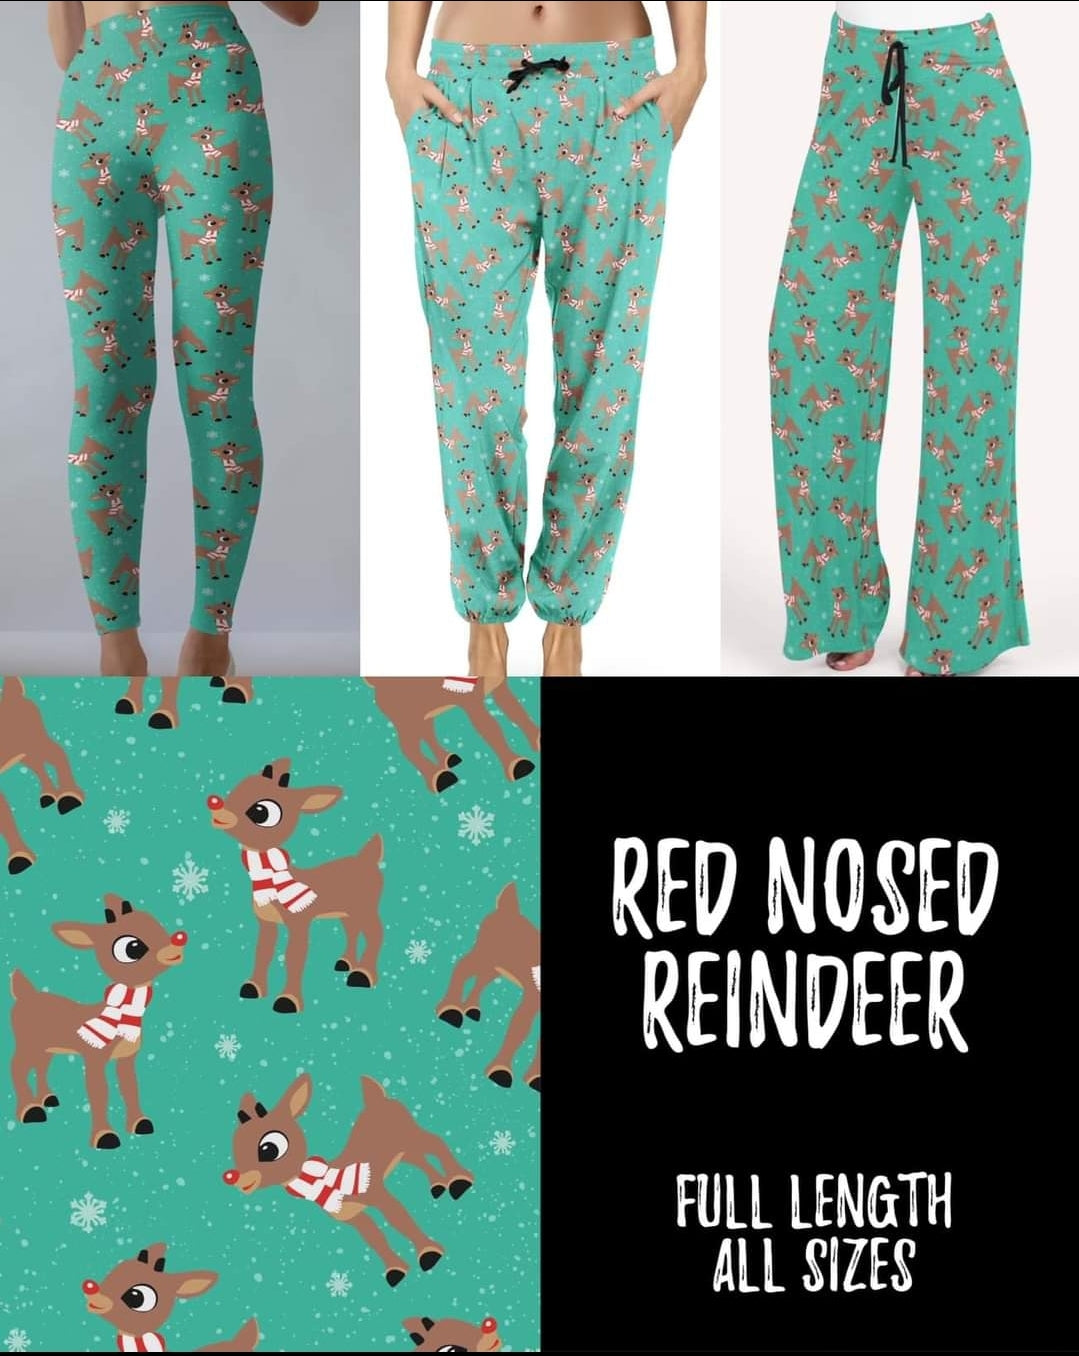 Red nosed reindeer leggings, joggers and lounger